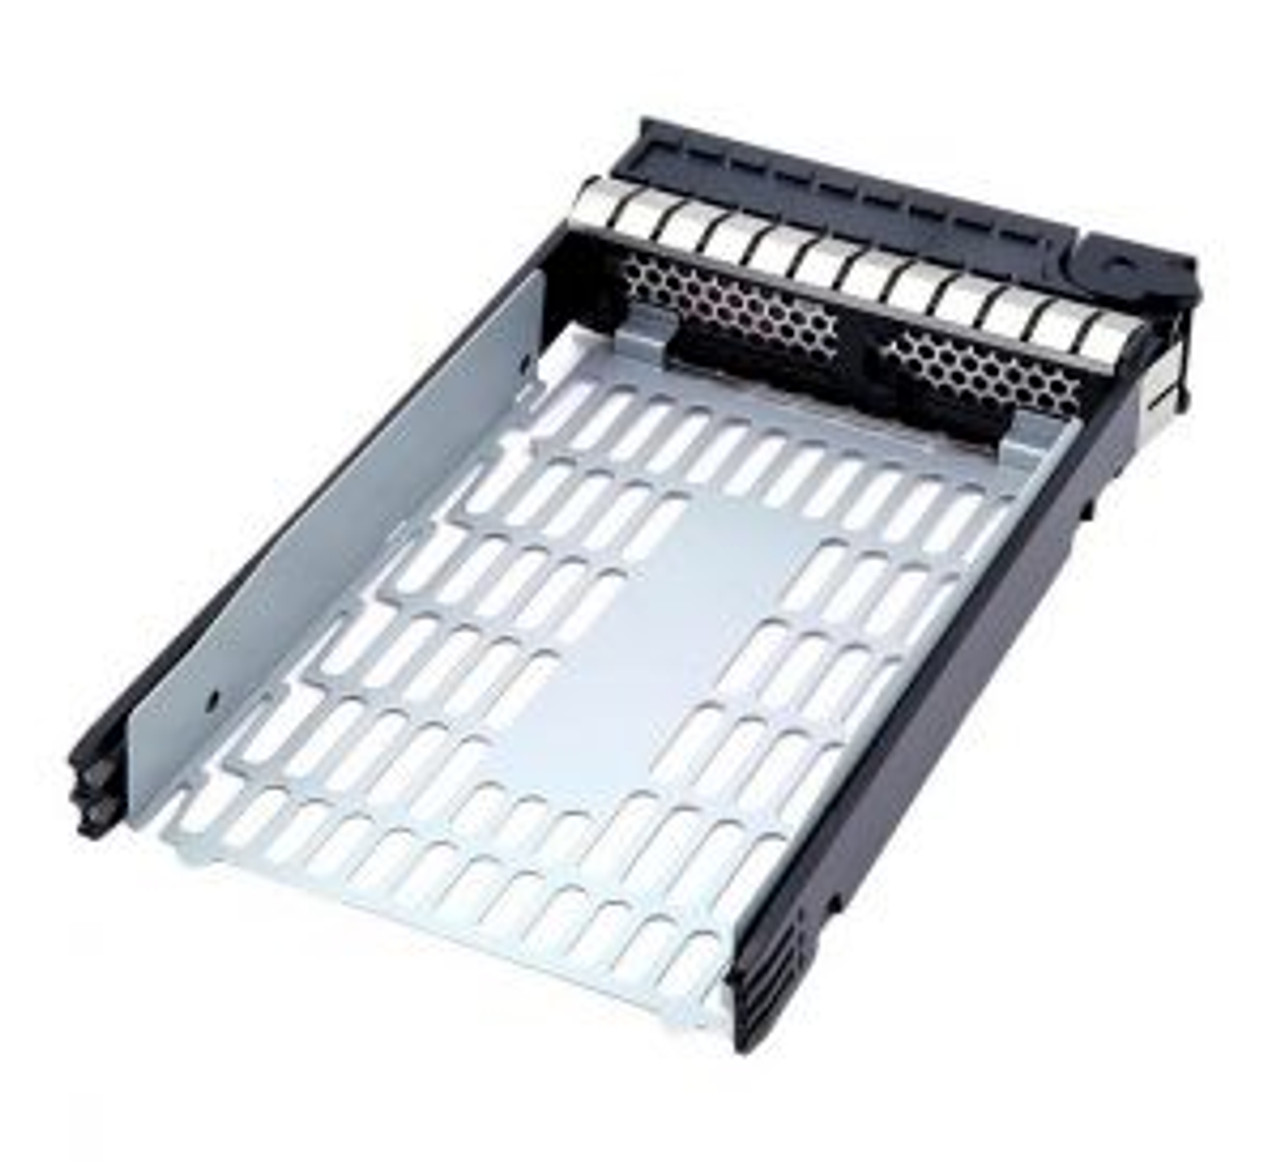 JV1MV Dell 1.8-inch Hot Swap Hard Drive Tray Caddy for Poweredge M420 and R730XD